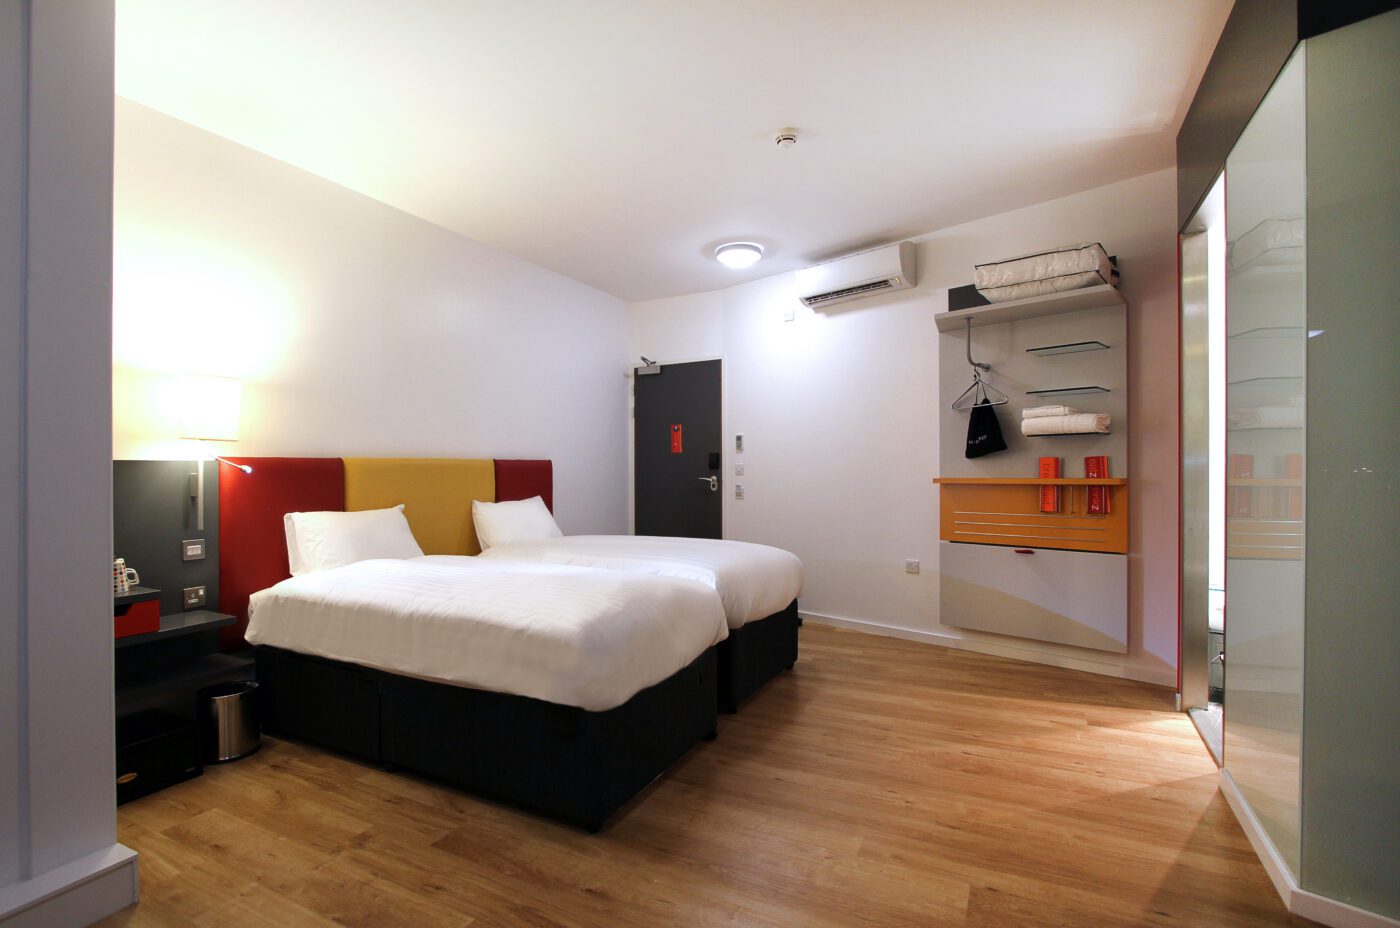 Twin room with two single beds, and small storage area.